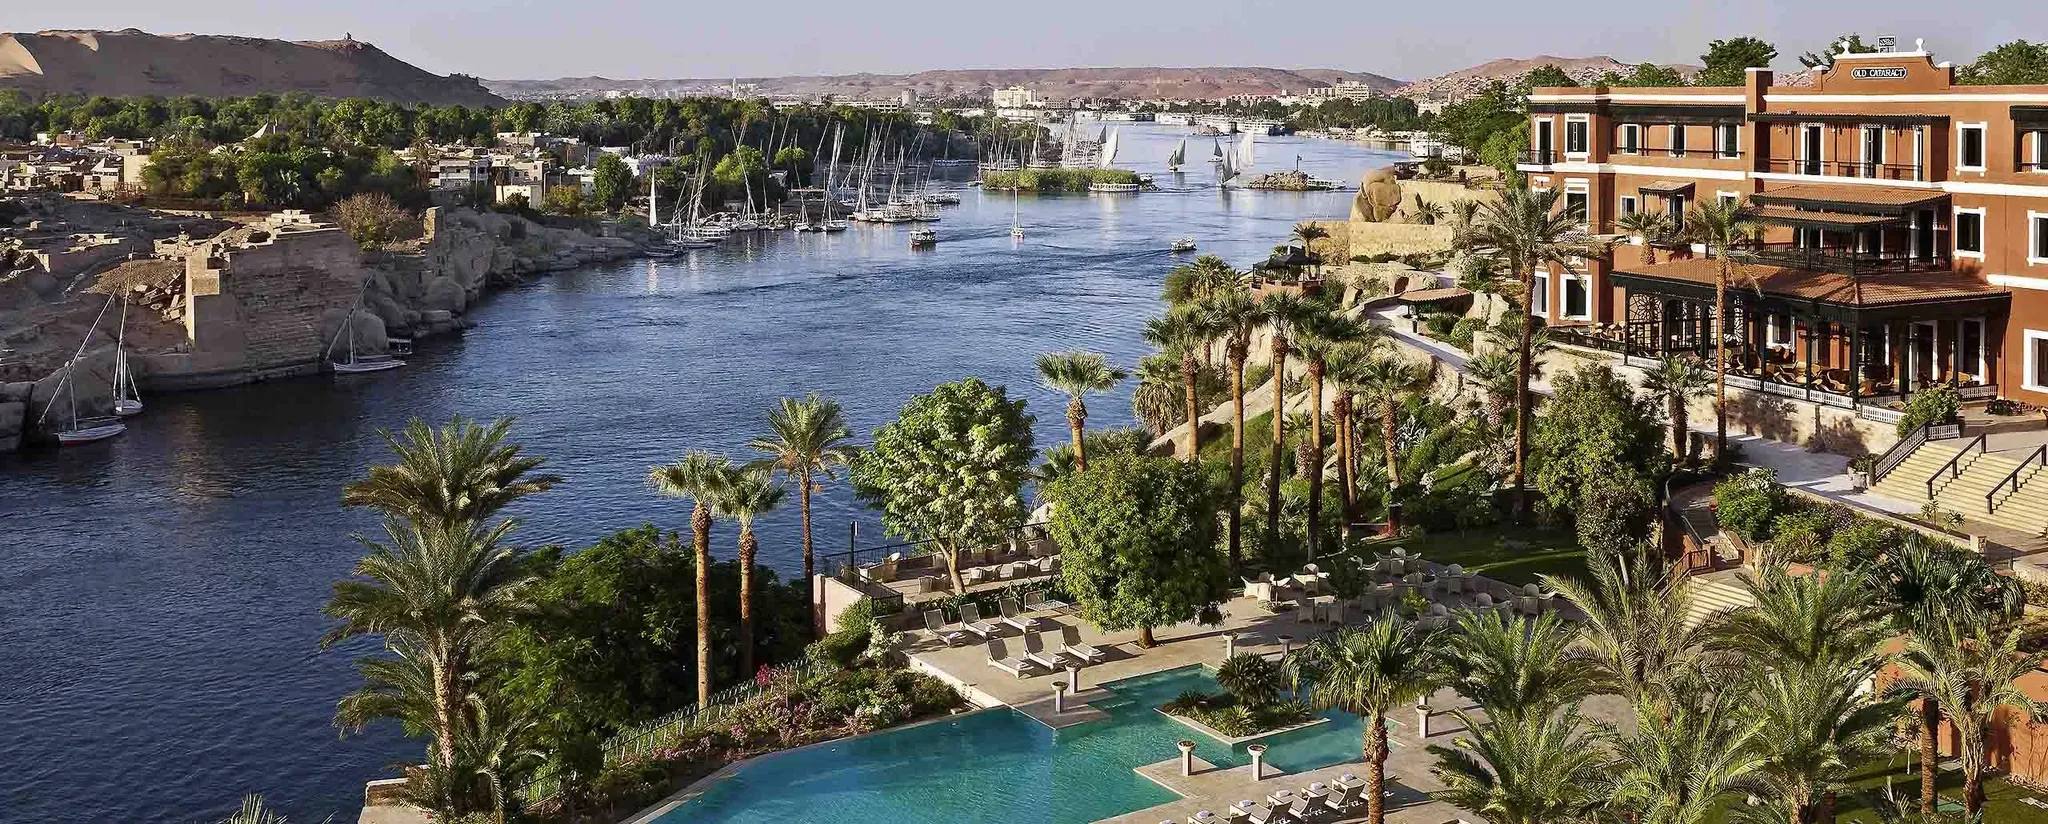 Aswan | Aswan Governorate Region, Egypt - Rated 2.6